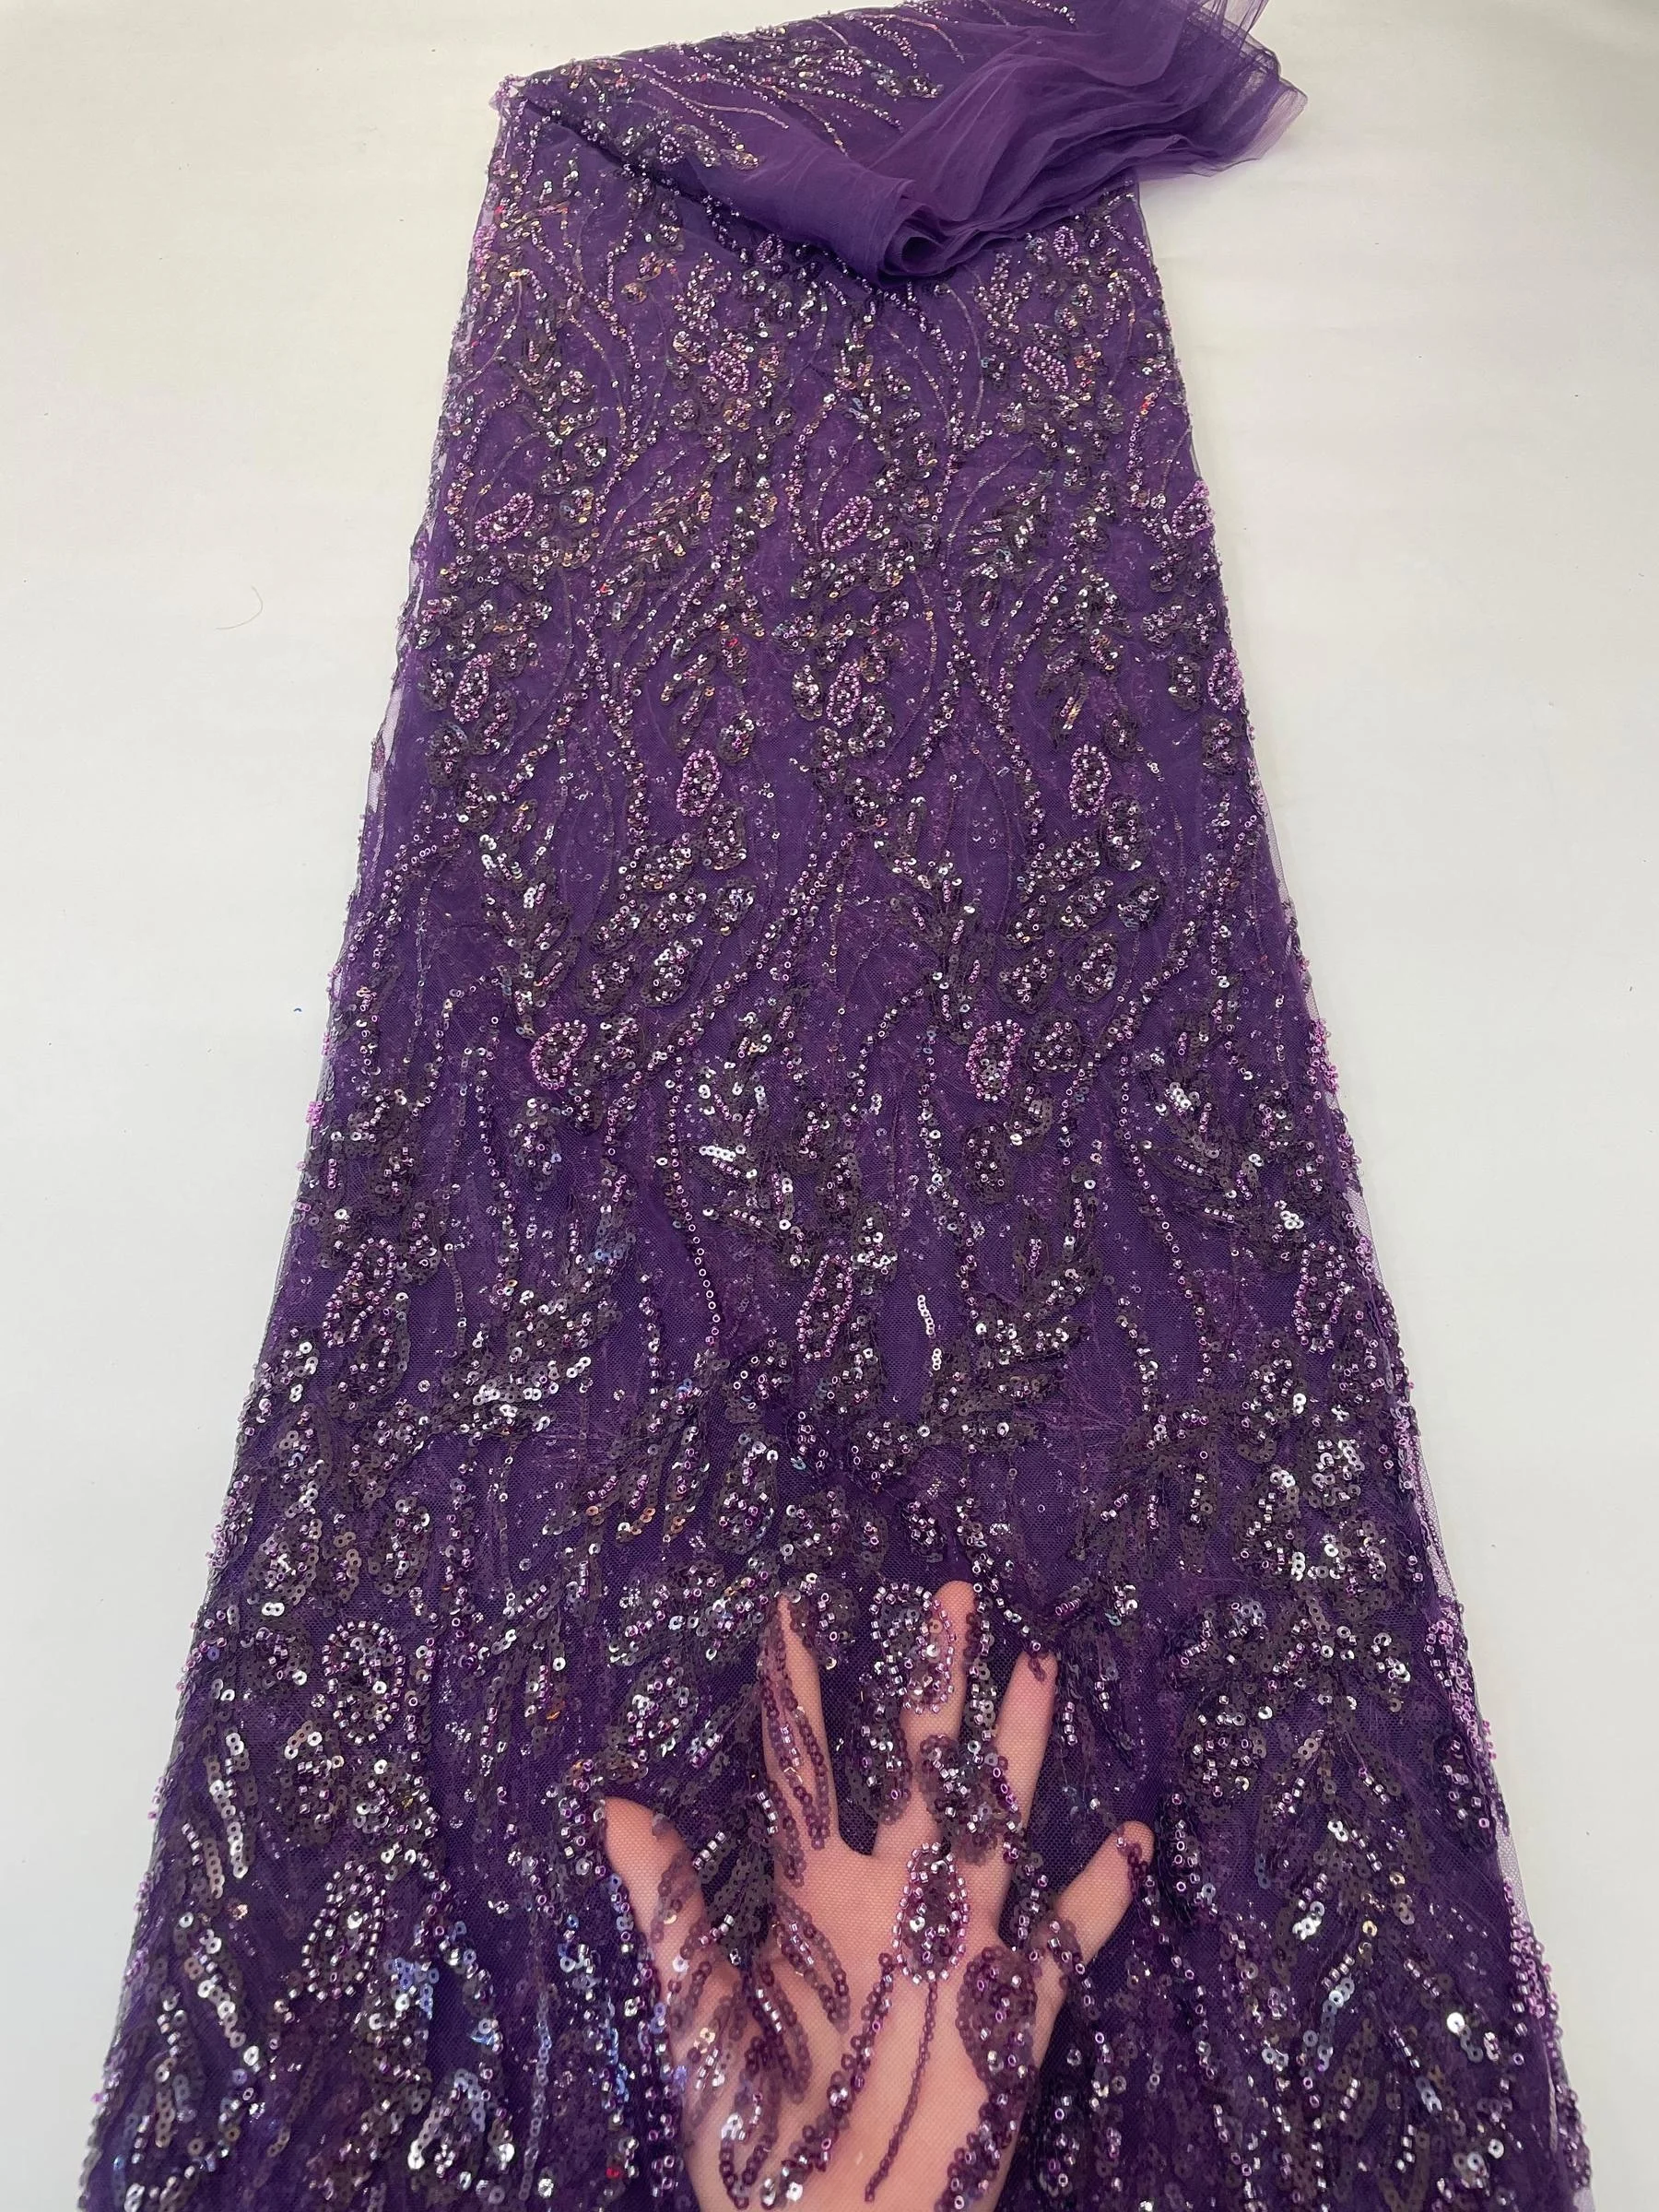 Luxury African Lace Fabric With Beads Lace High Quality Fashion Sequin Embroidered French Tulle Lace Fabric For Nigerian Wedding